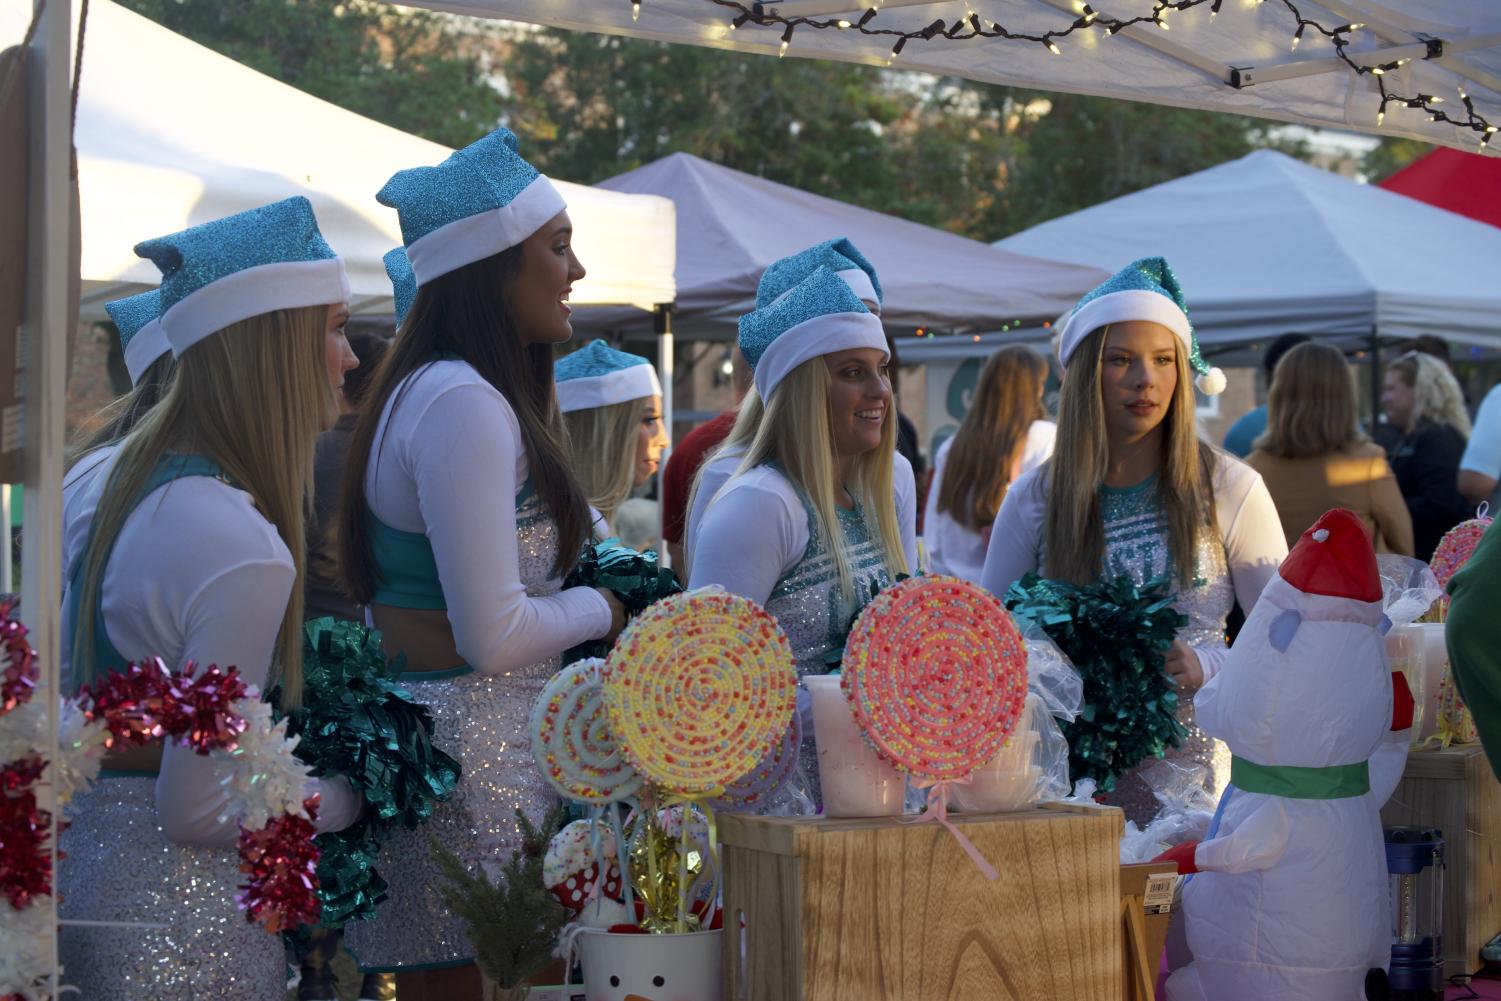 The CCU Dance Team talks with vendors and browses available items.